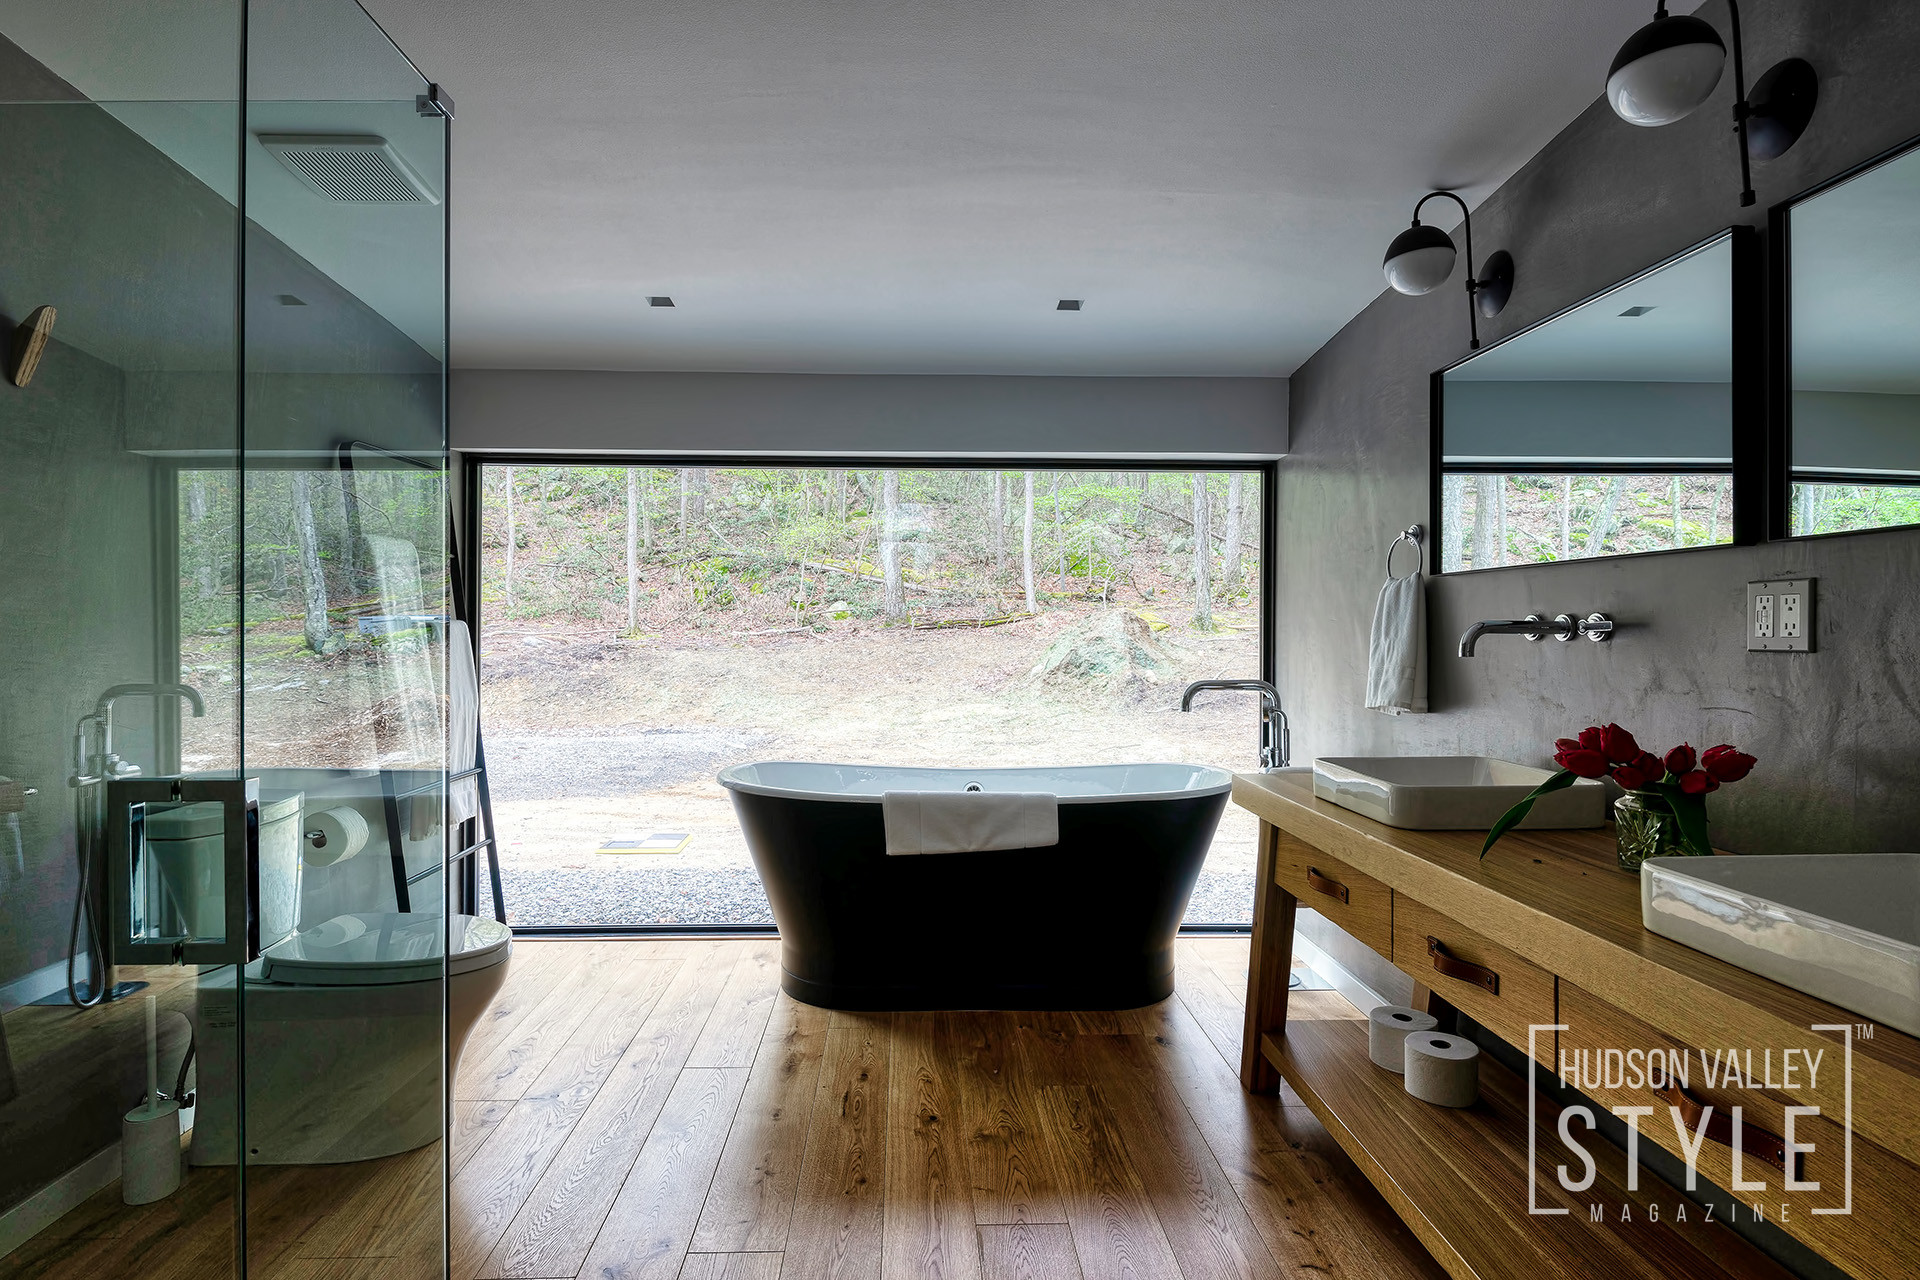 Escape city life in this tranquil Hudson Valley Style retreat created by the Hudson Design